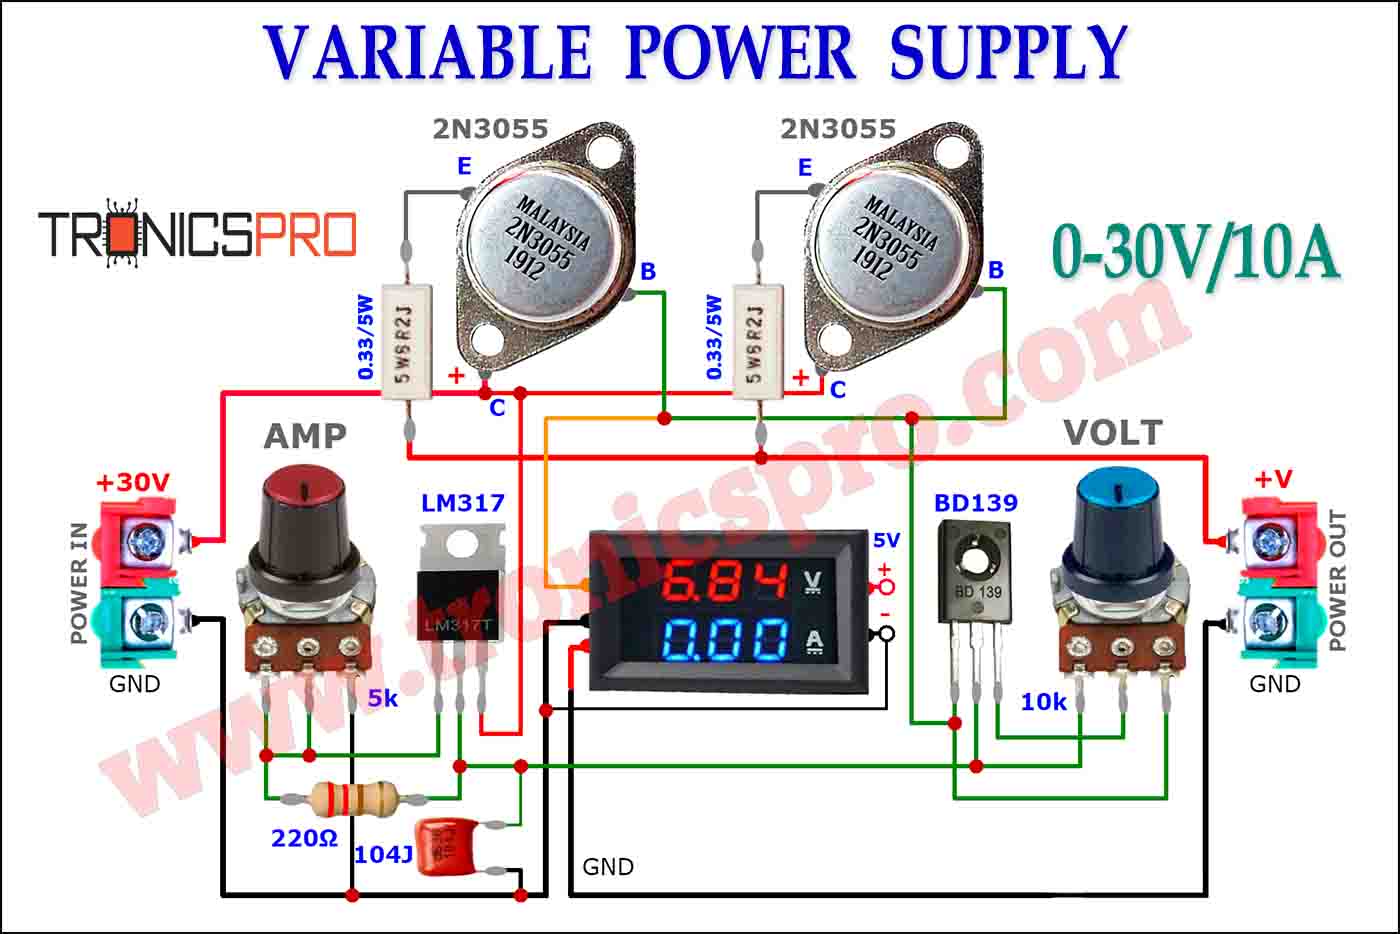 Electricity power saver circuit diagram for your home application